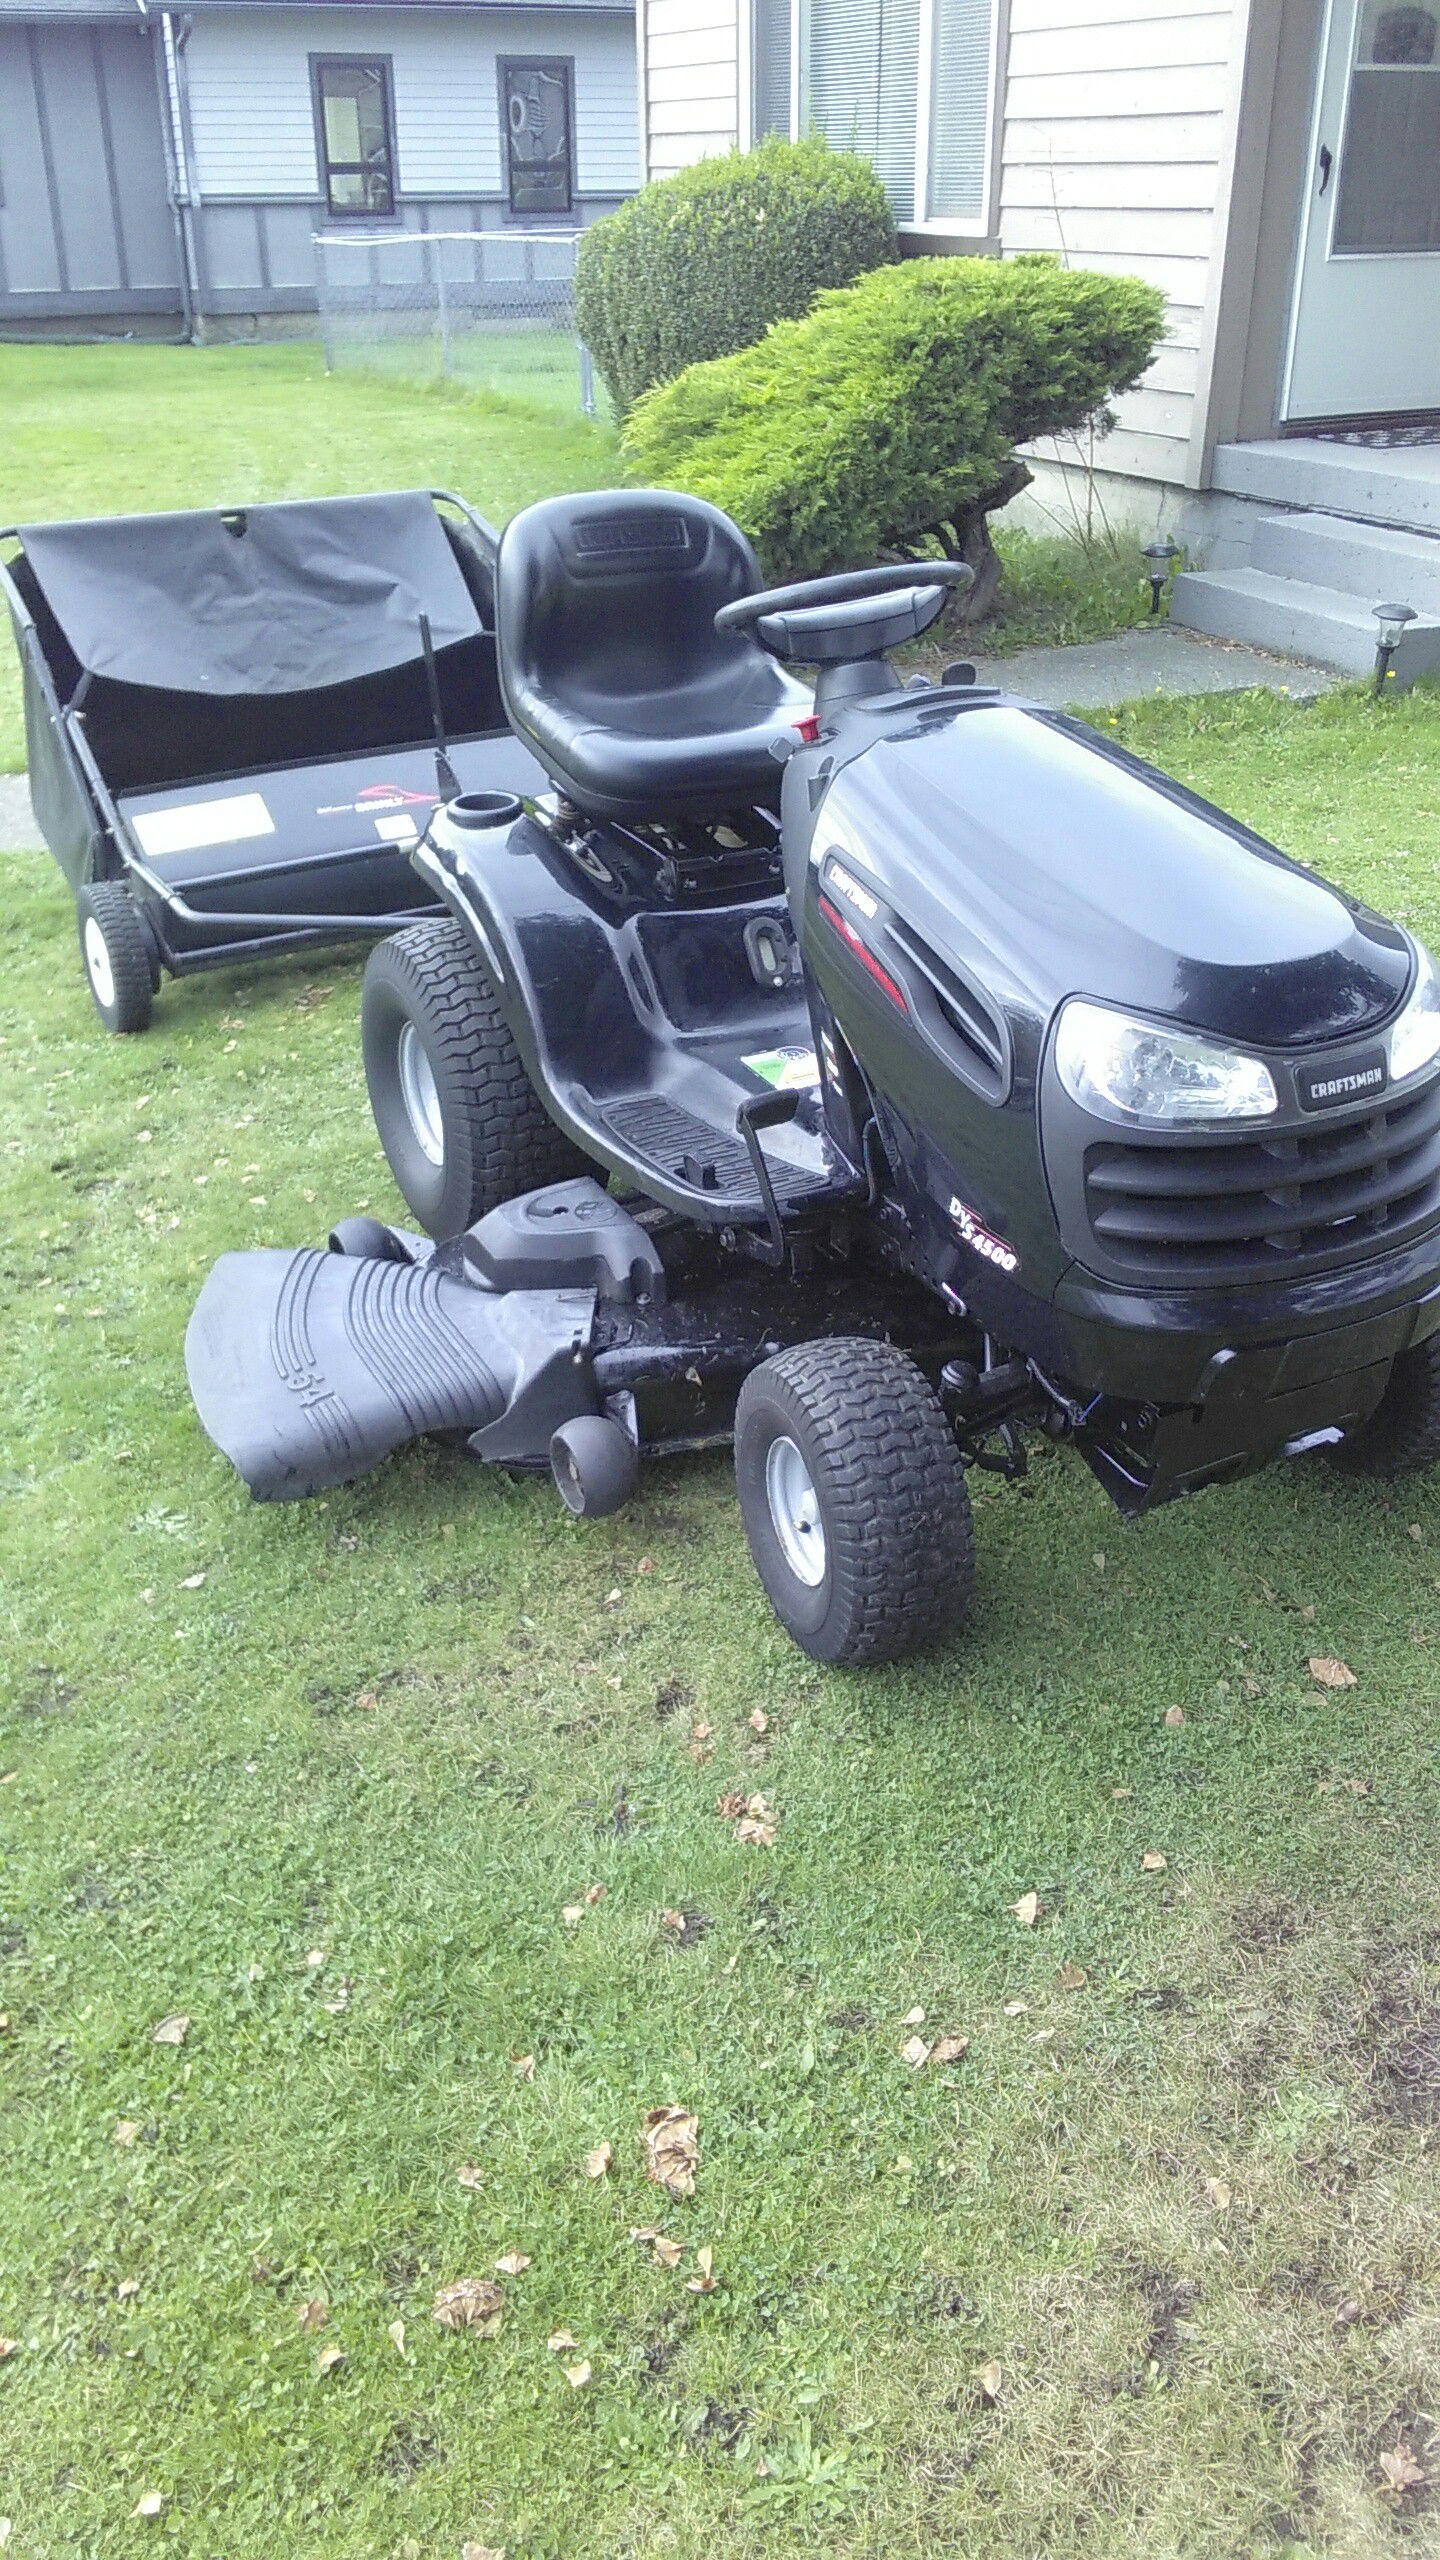 ( sold ) 2009 Craftsman DYS 4500 riding mower with lawn sweeper